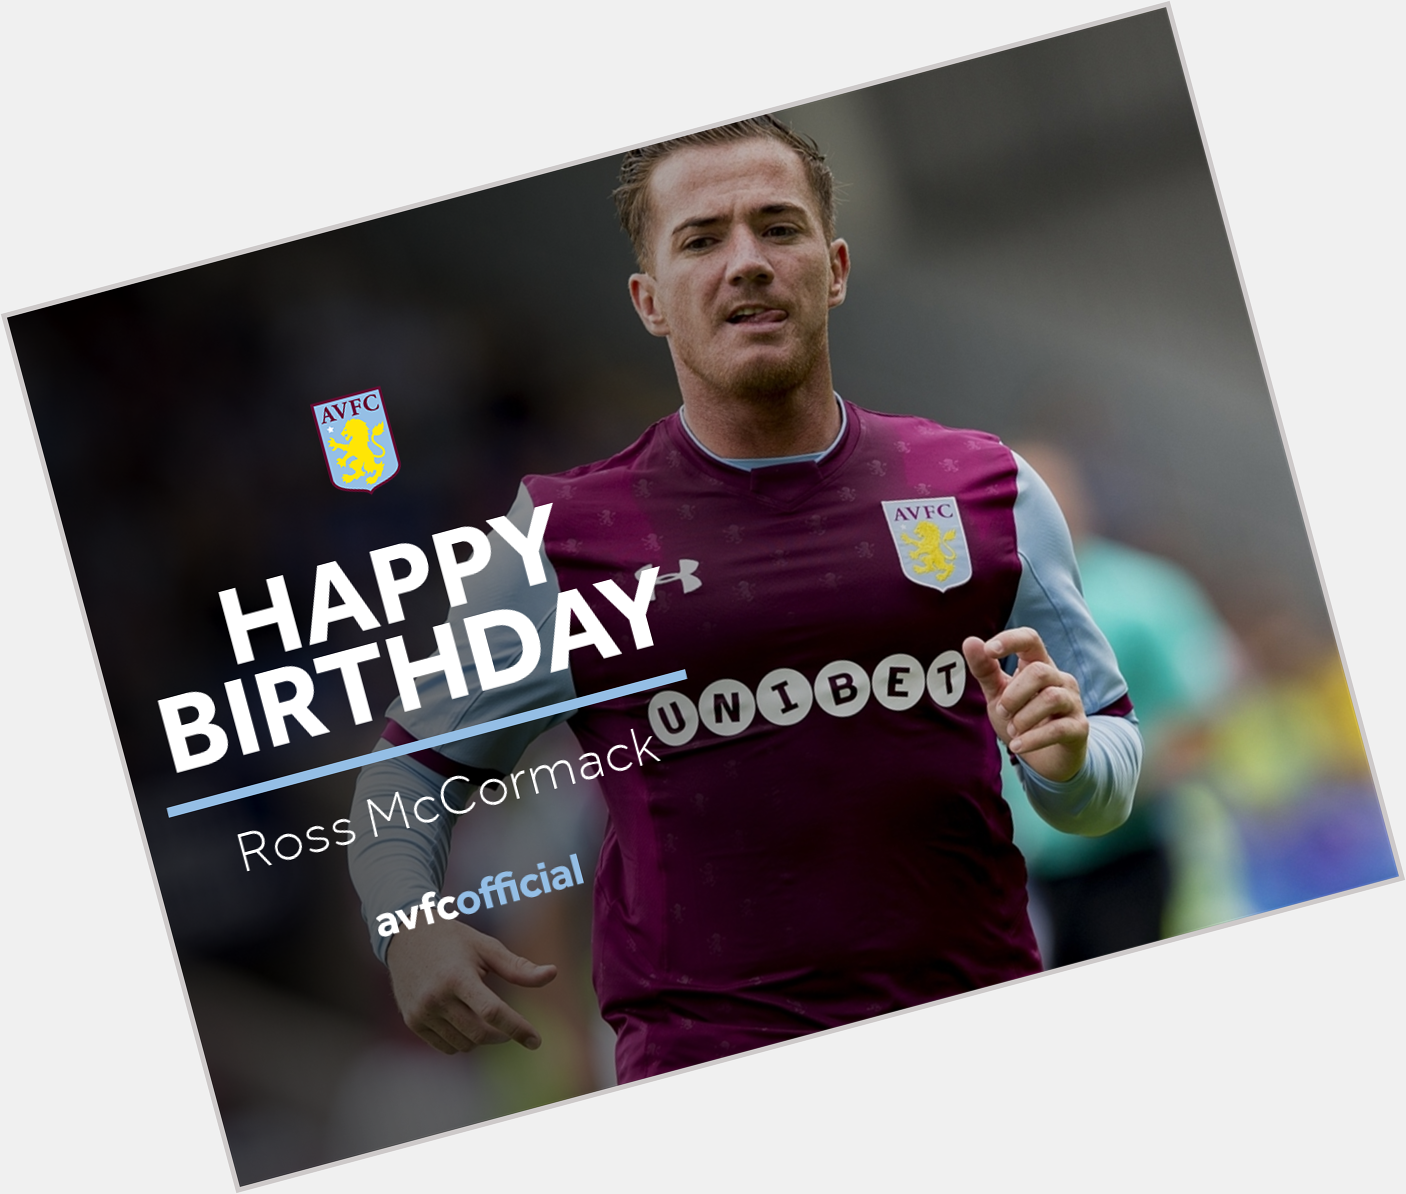  Today we\re wishing a happy birthday to Ross McCormack...

Enjoy the rest of your day Ross!  